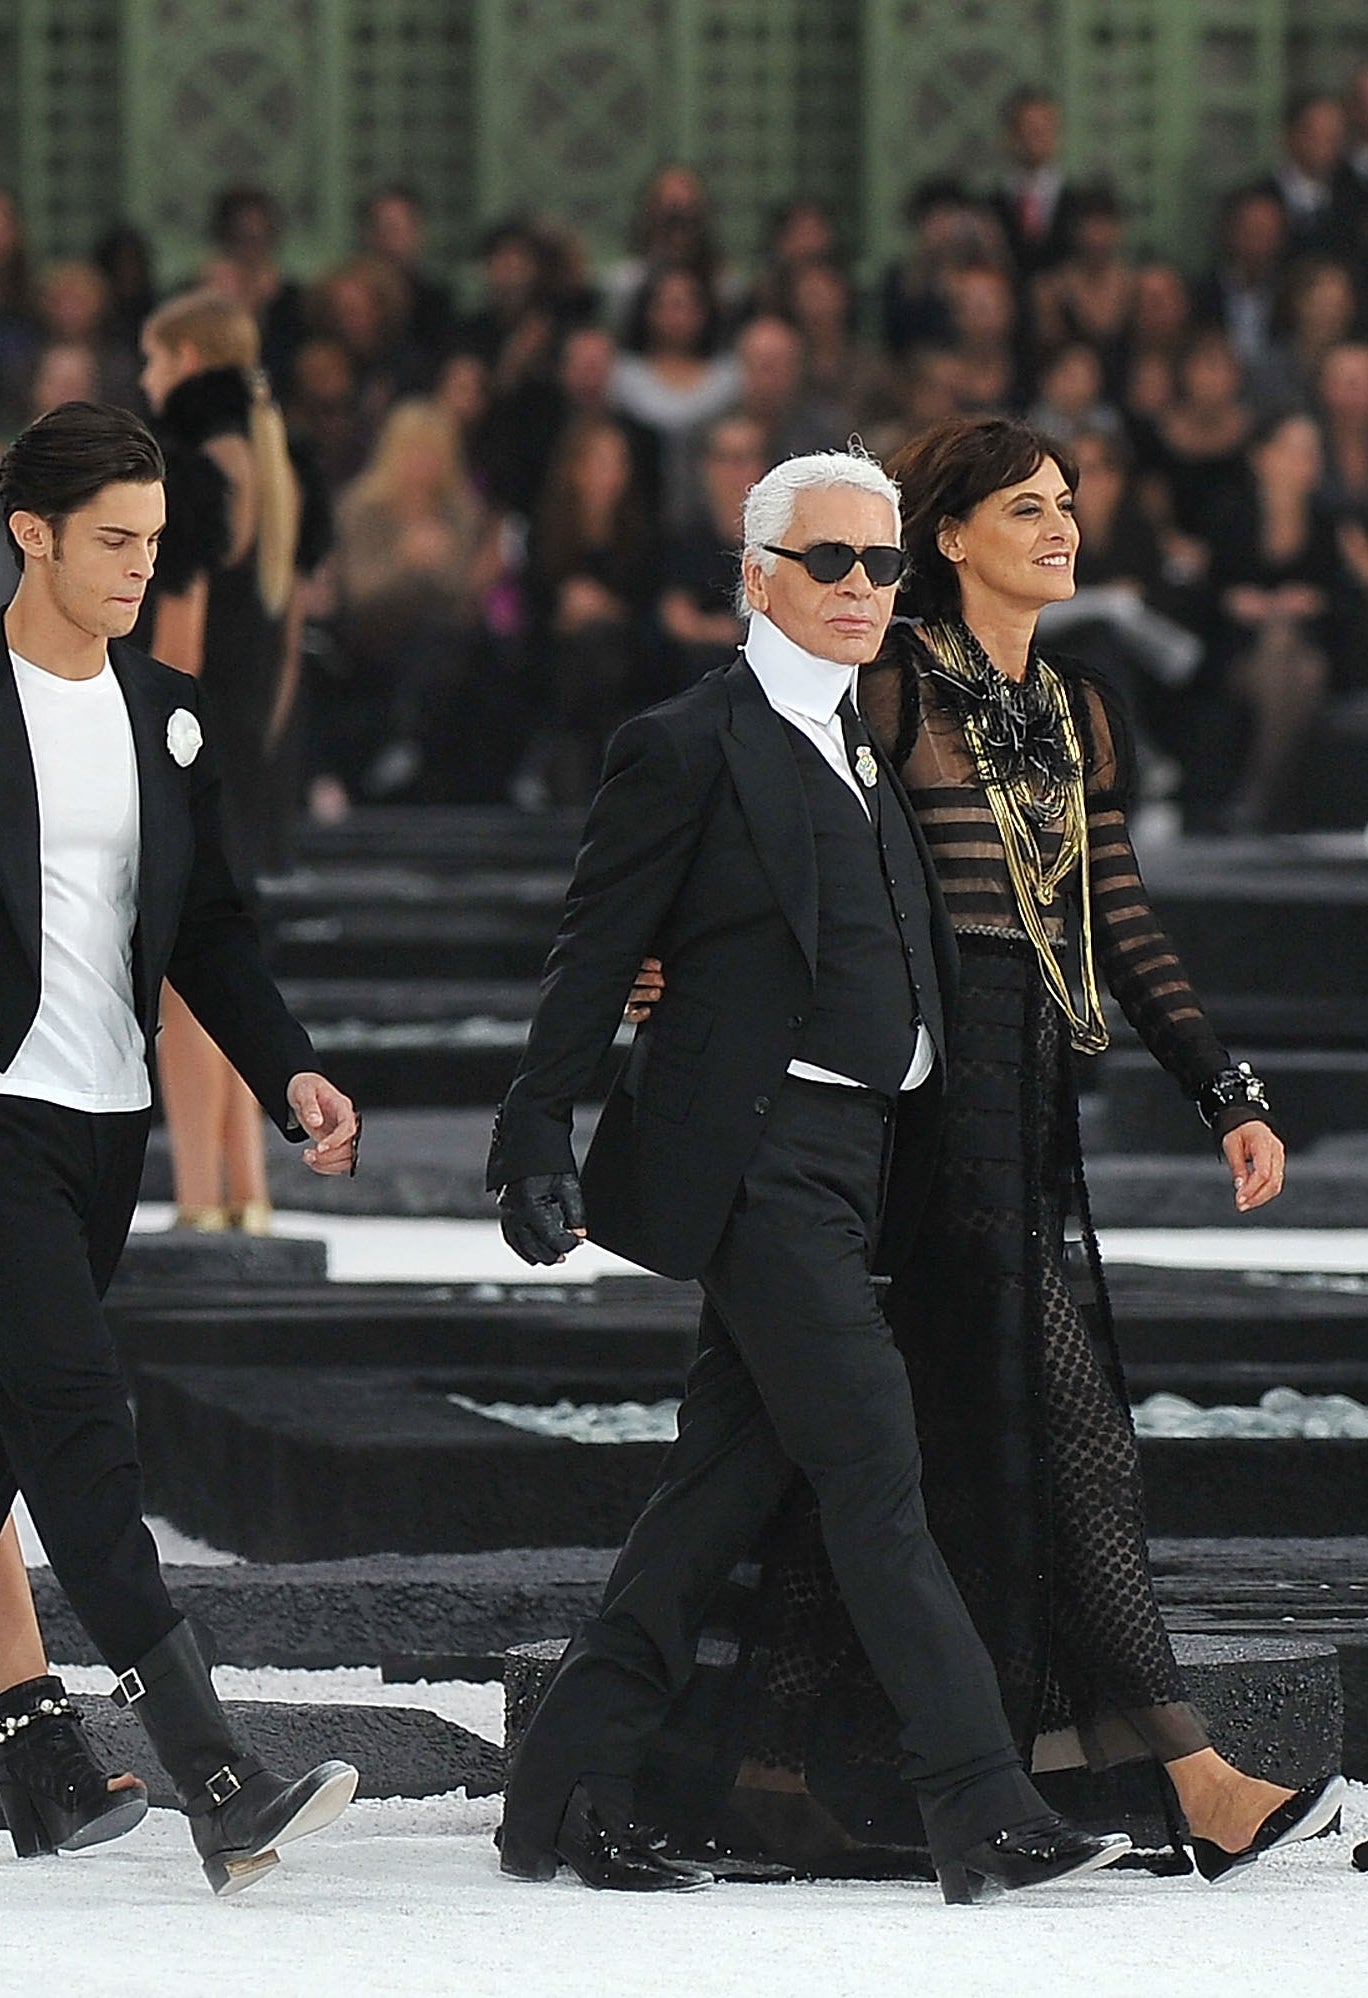 A model, Baptiste Giabiconi, Karl Lagerfeld and Ines de la Fressange walk the runway during the Chanel Ready to Wear Spring/Summer 2011 show during Paris Fashion Week